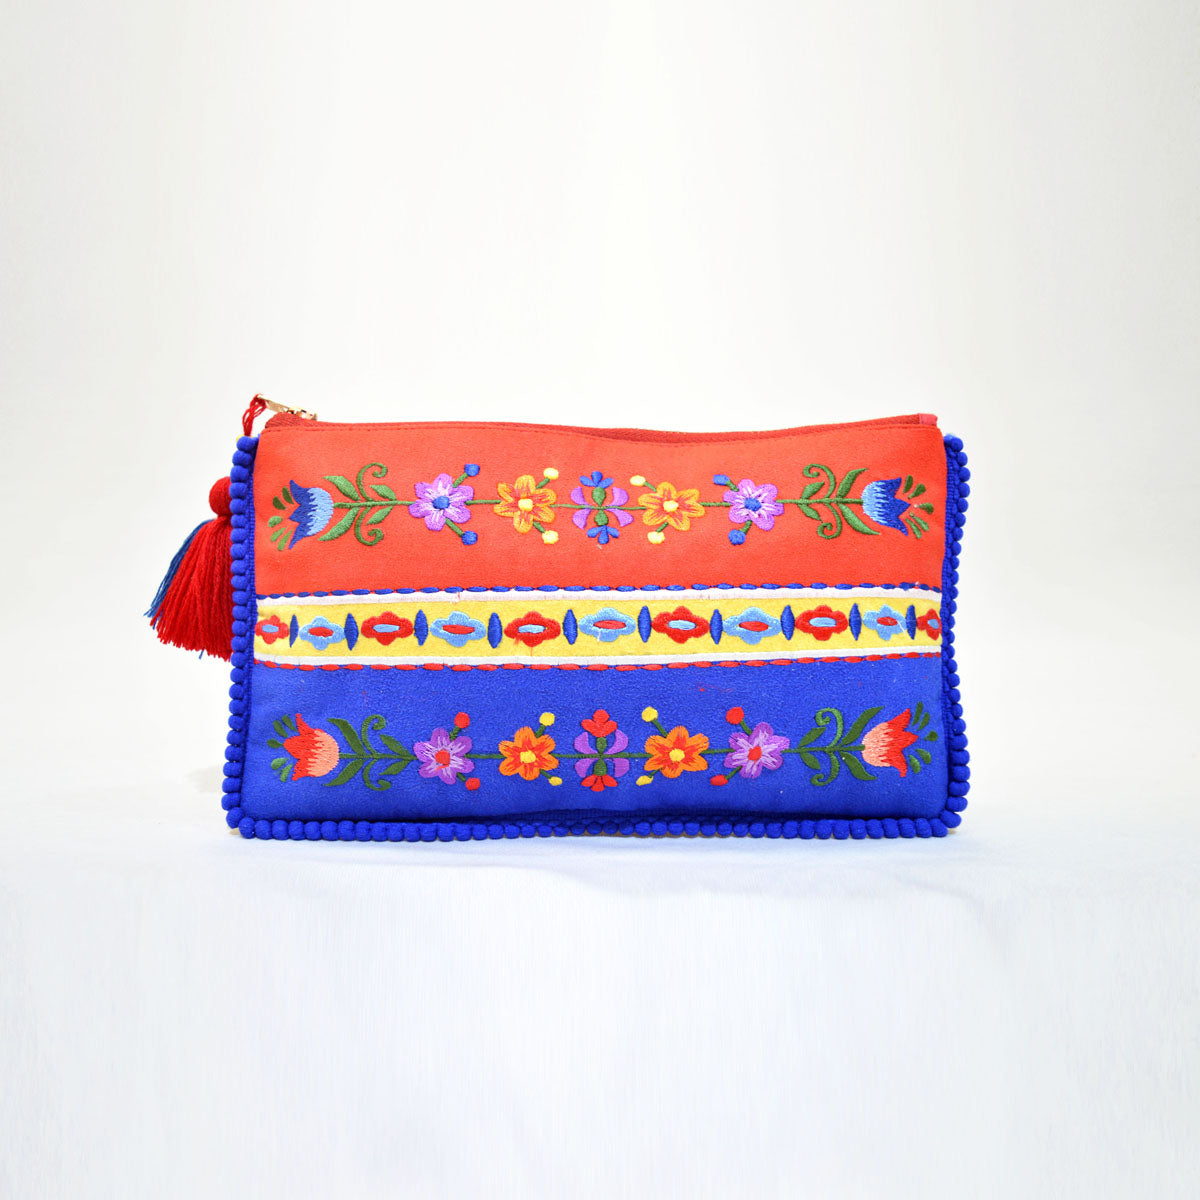 Truck art - Red and blue embroidered pouch, 5X9 inches